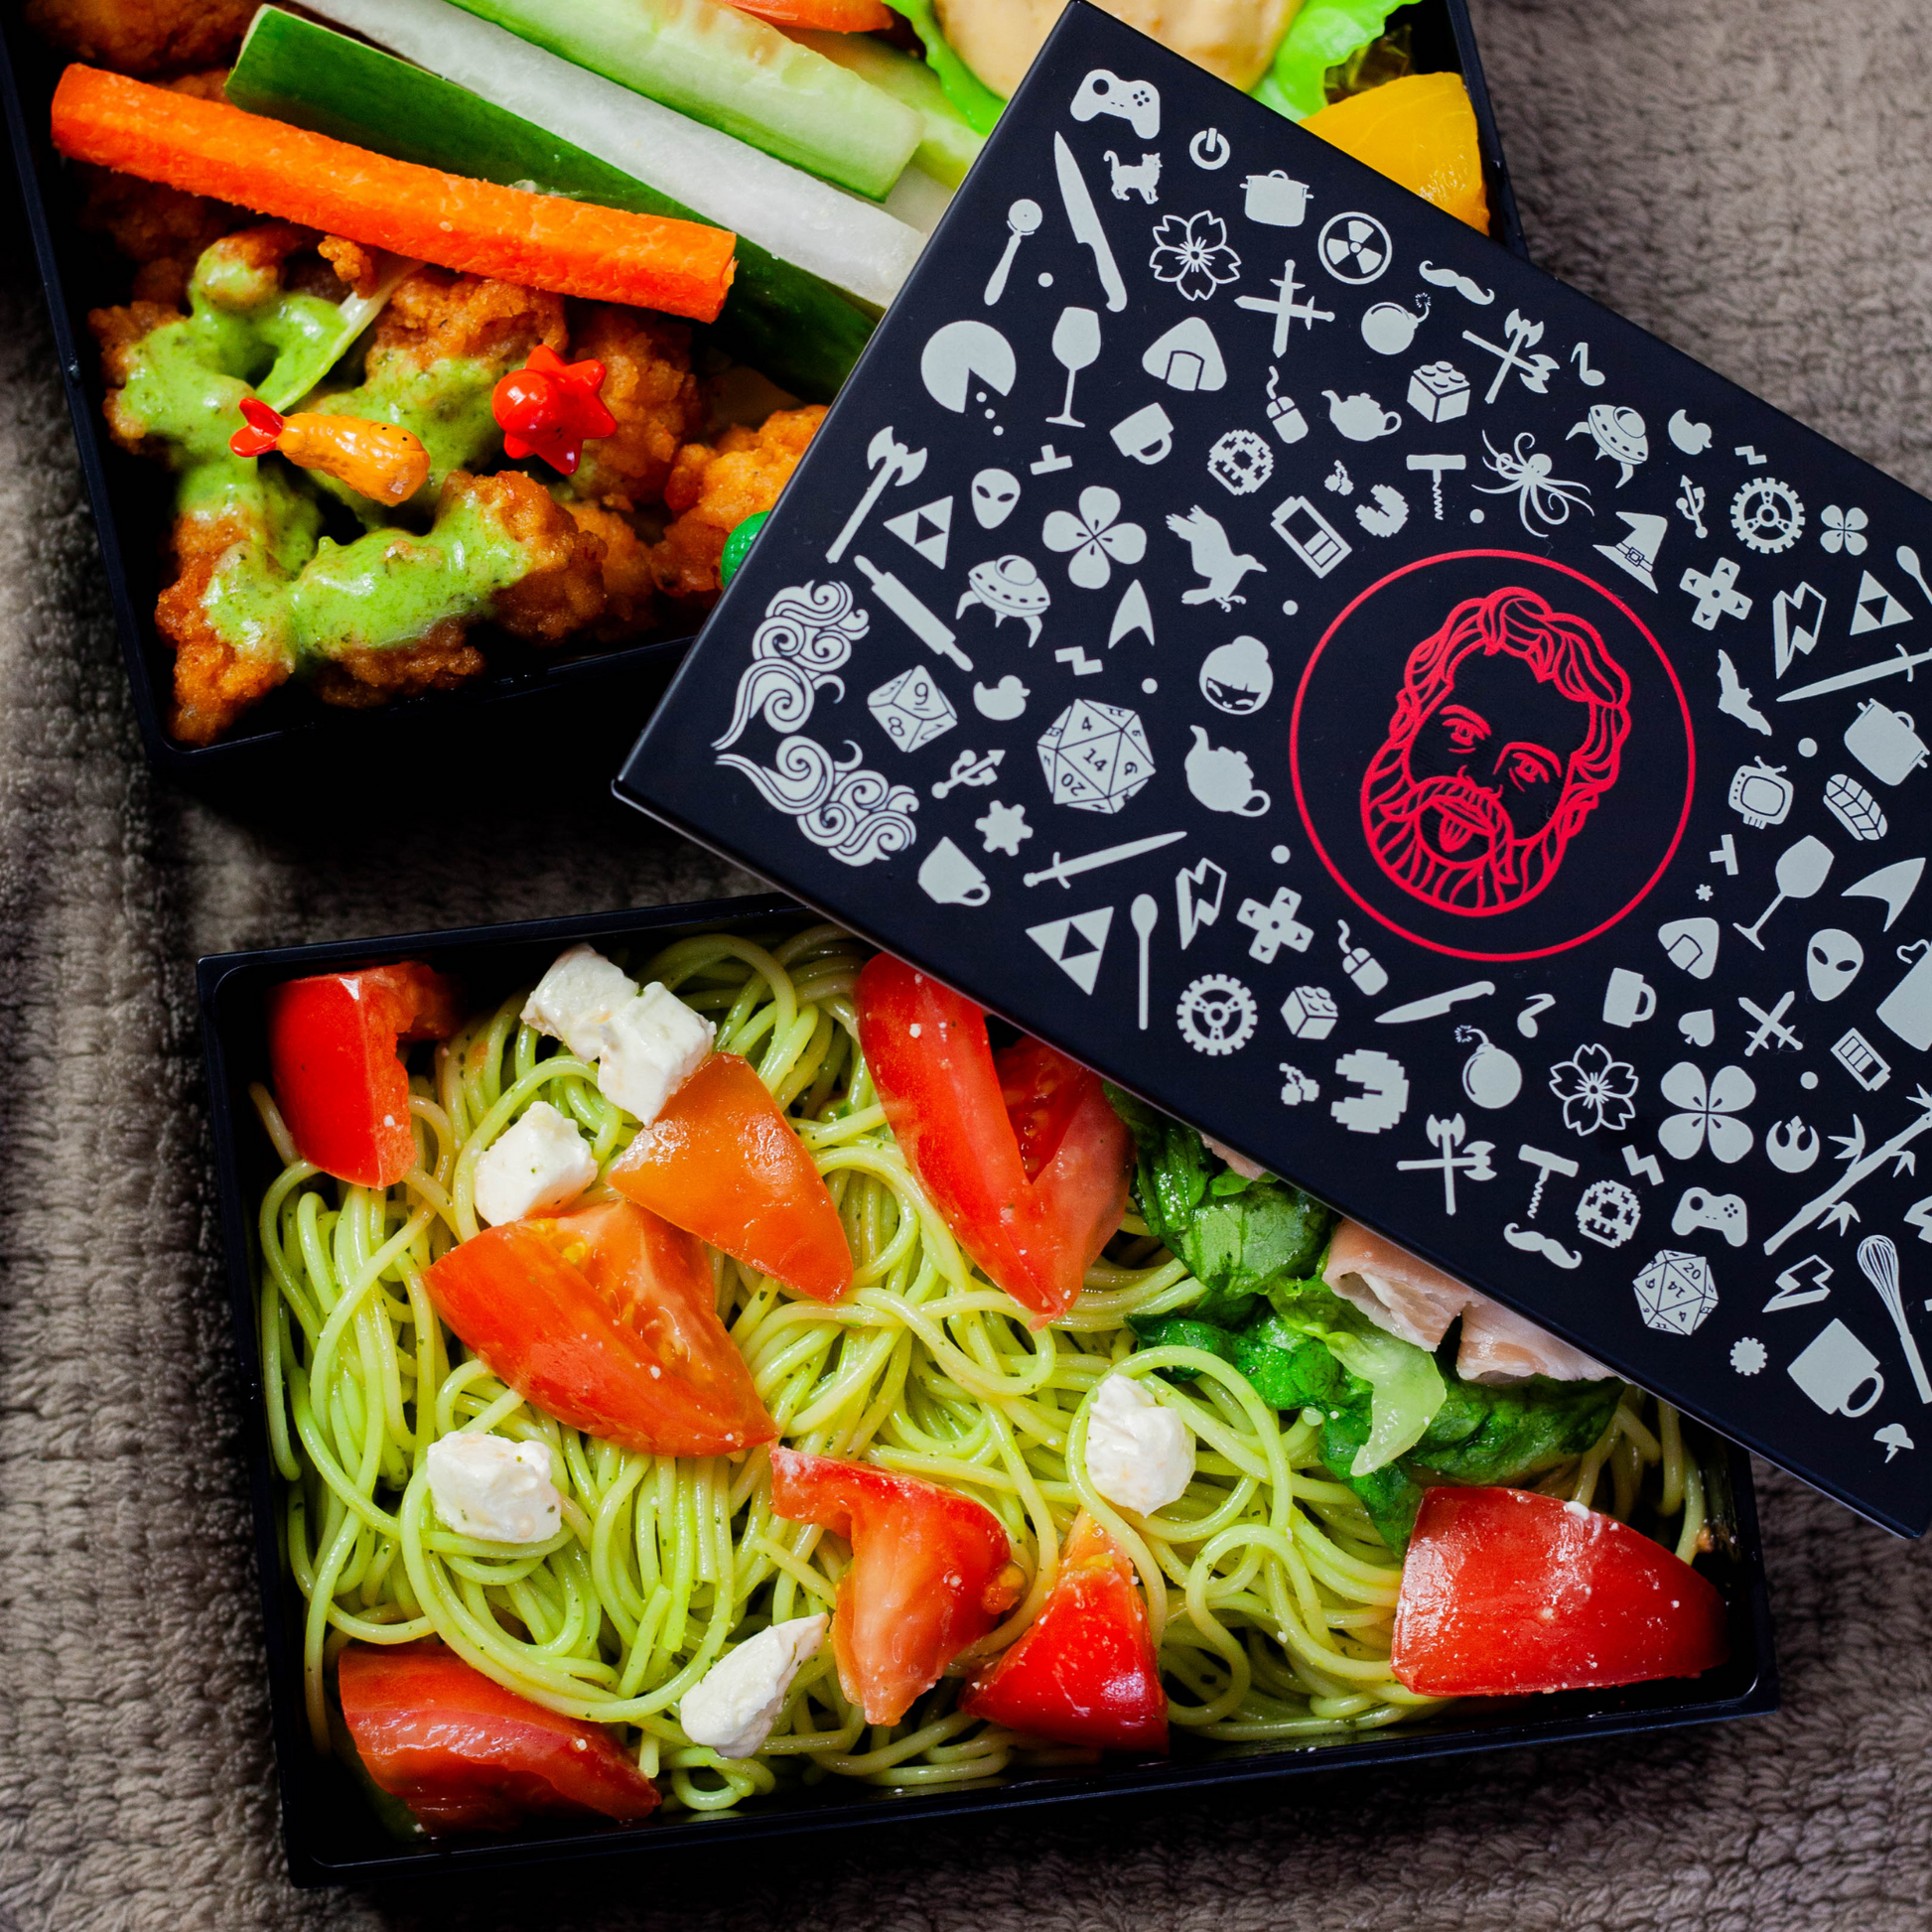 Leakproof Bento Box with Fun Lunch Notes, Cutlery with Chopsticks